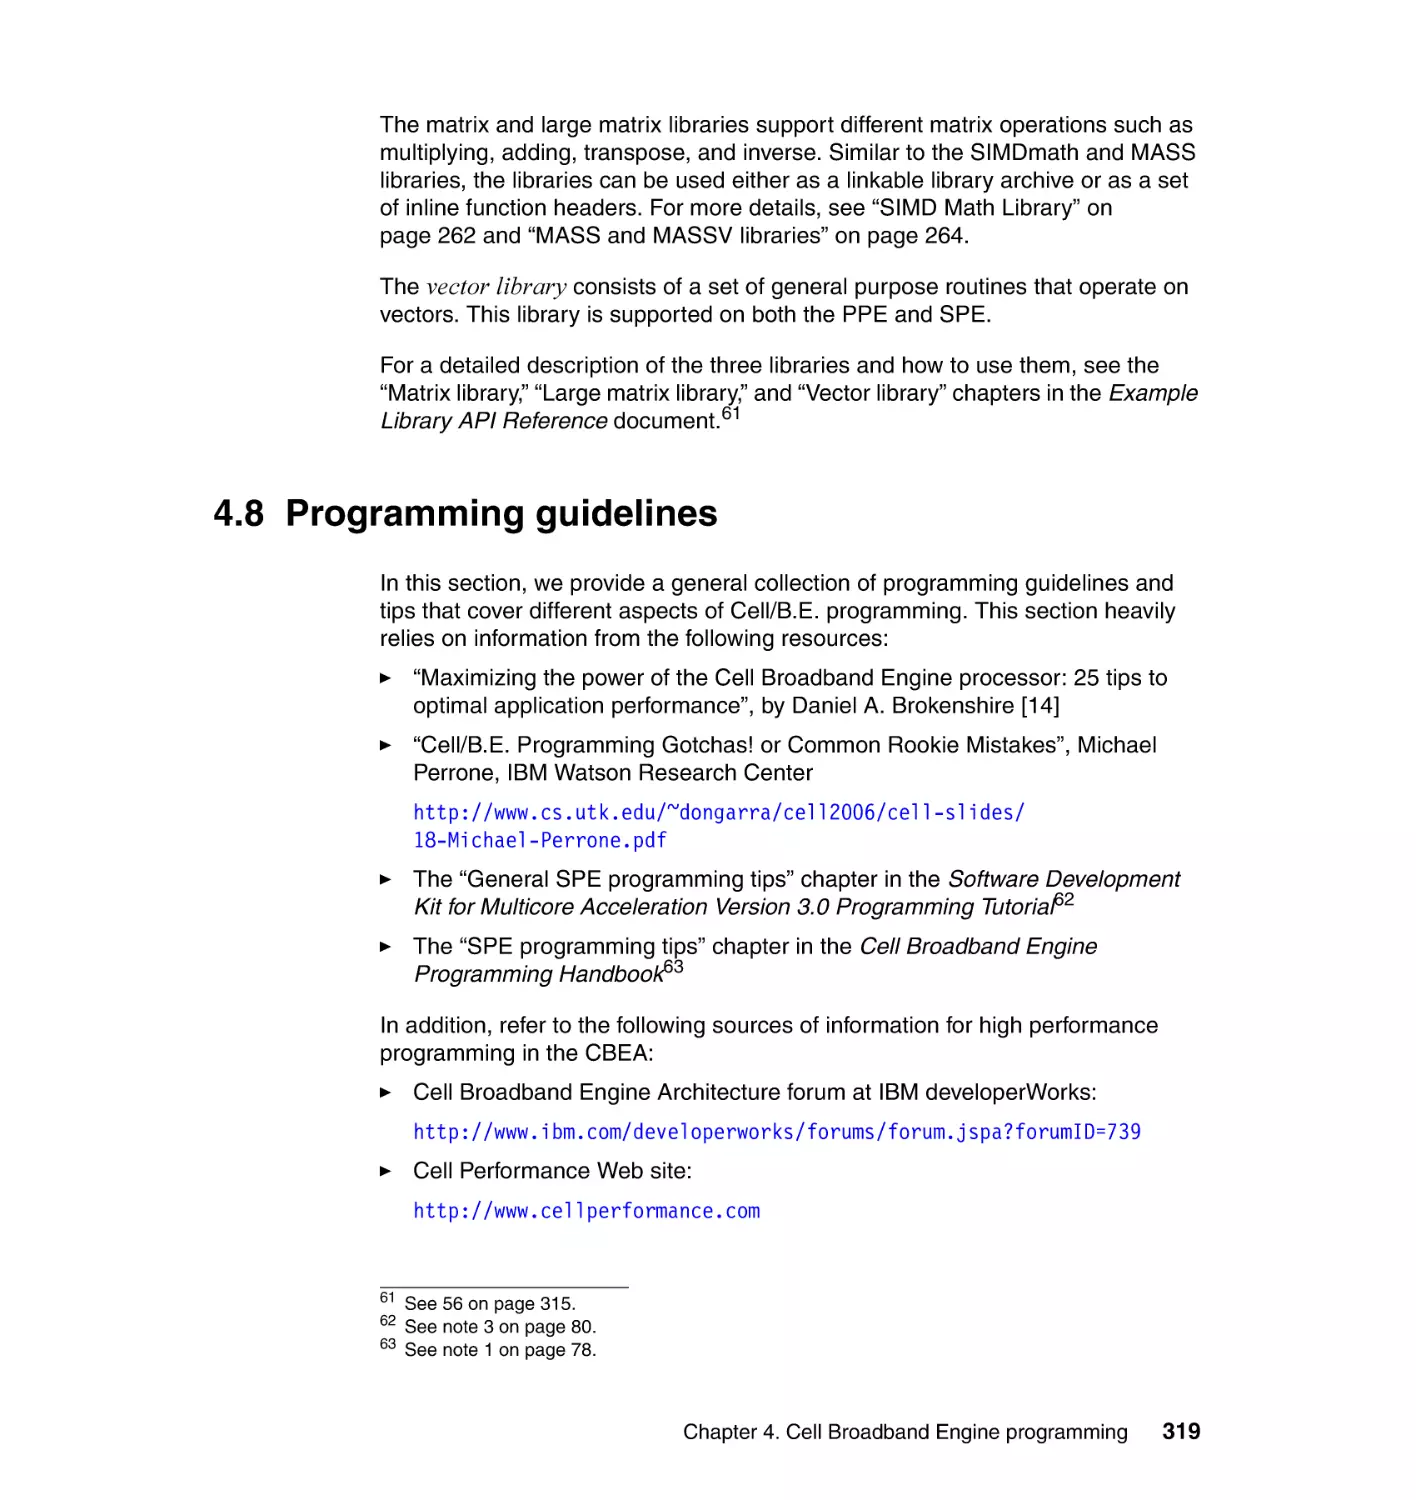 4.8 Programming guidelines